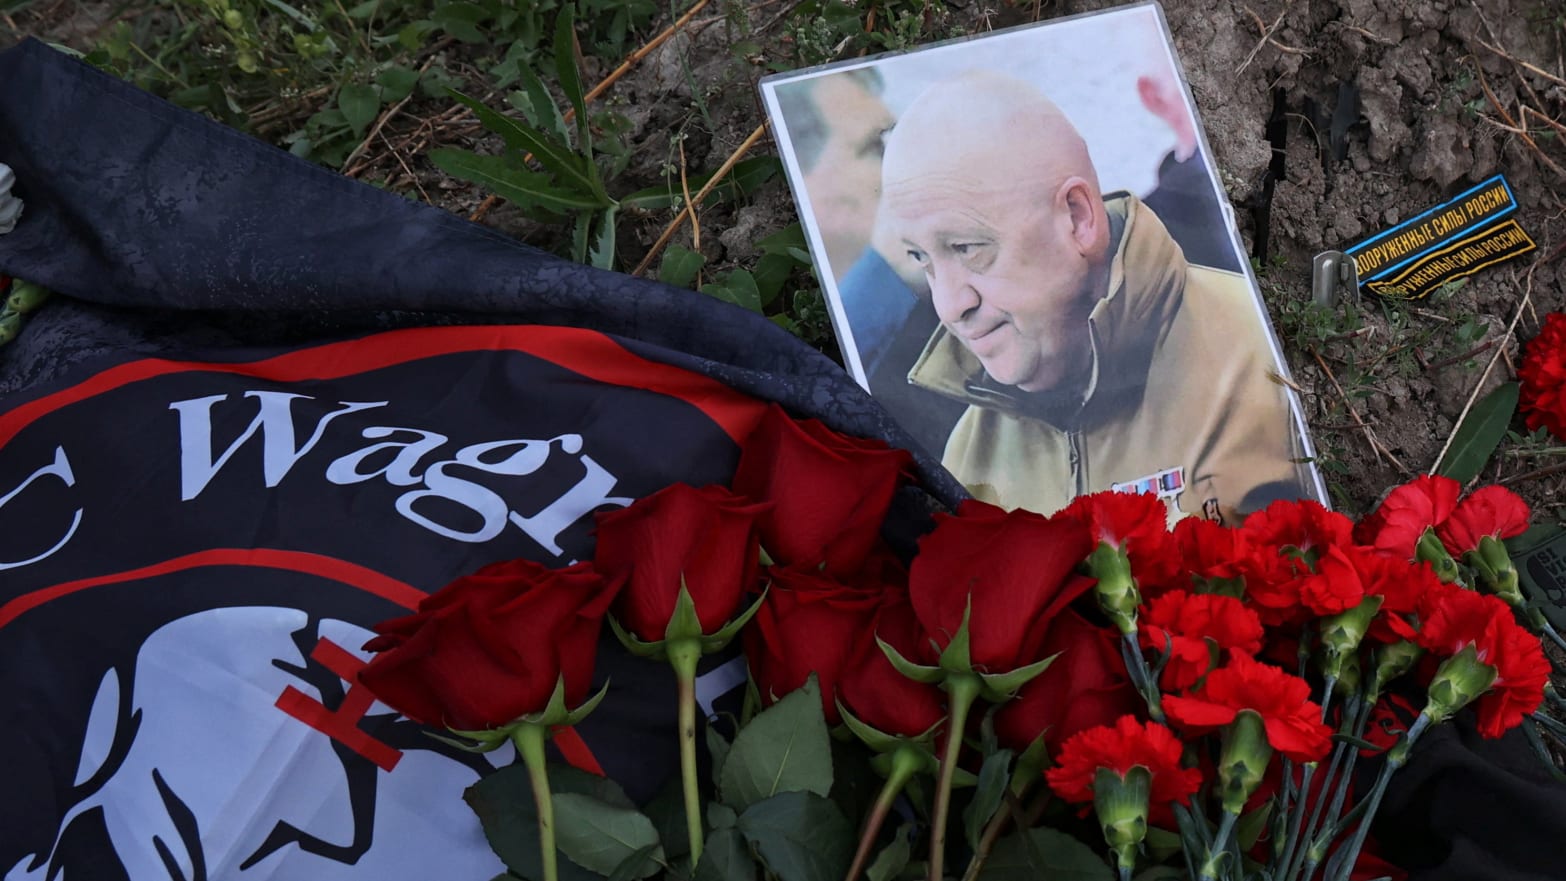 A photo of Yevgeny Prigozhin with the Wagner Group flag and red flowers.